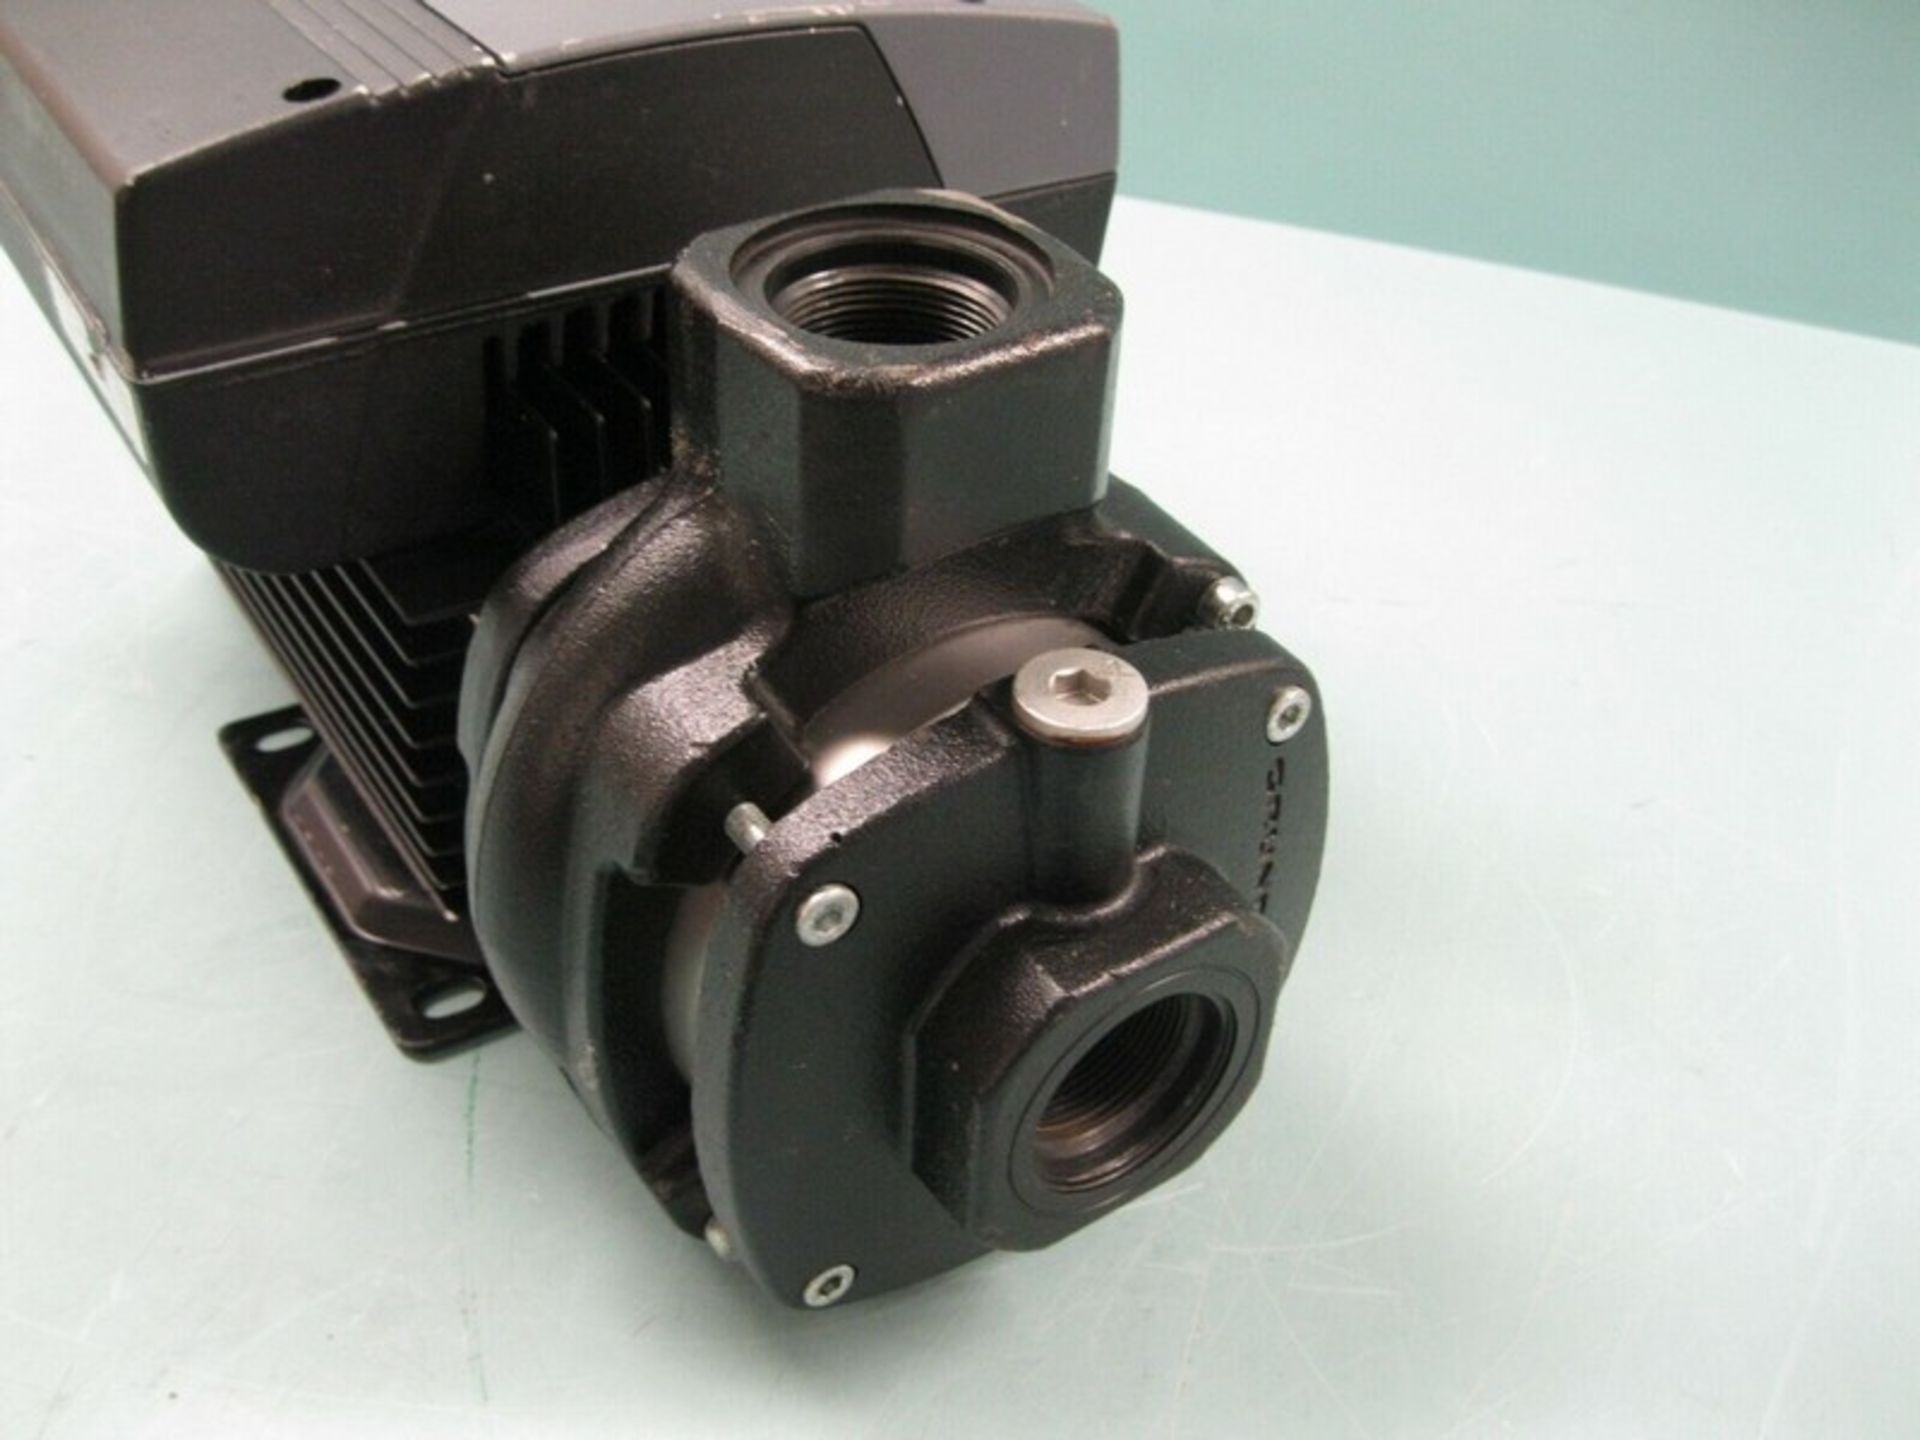 1-1/2" NPT Grundfos CME10-2 Cast Iron End Suction Pump 3 HP Motor B15 (2996) (Loading Fee $50) ( - Image 6 of 8